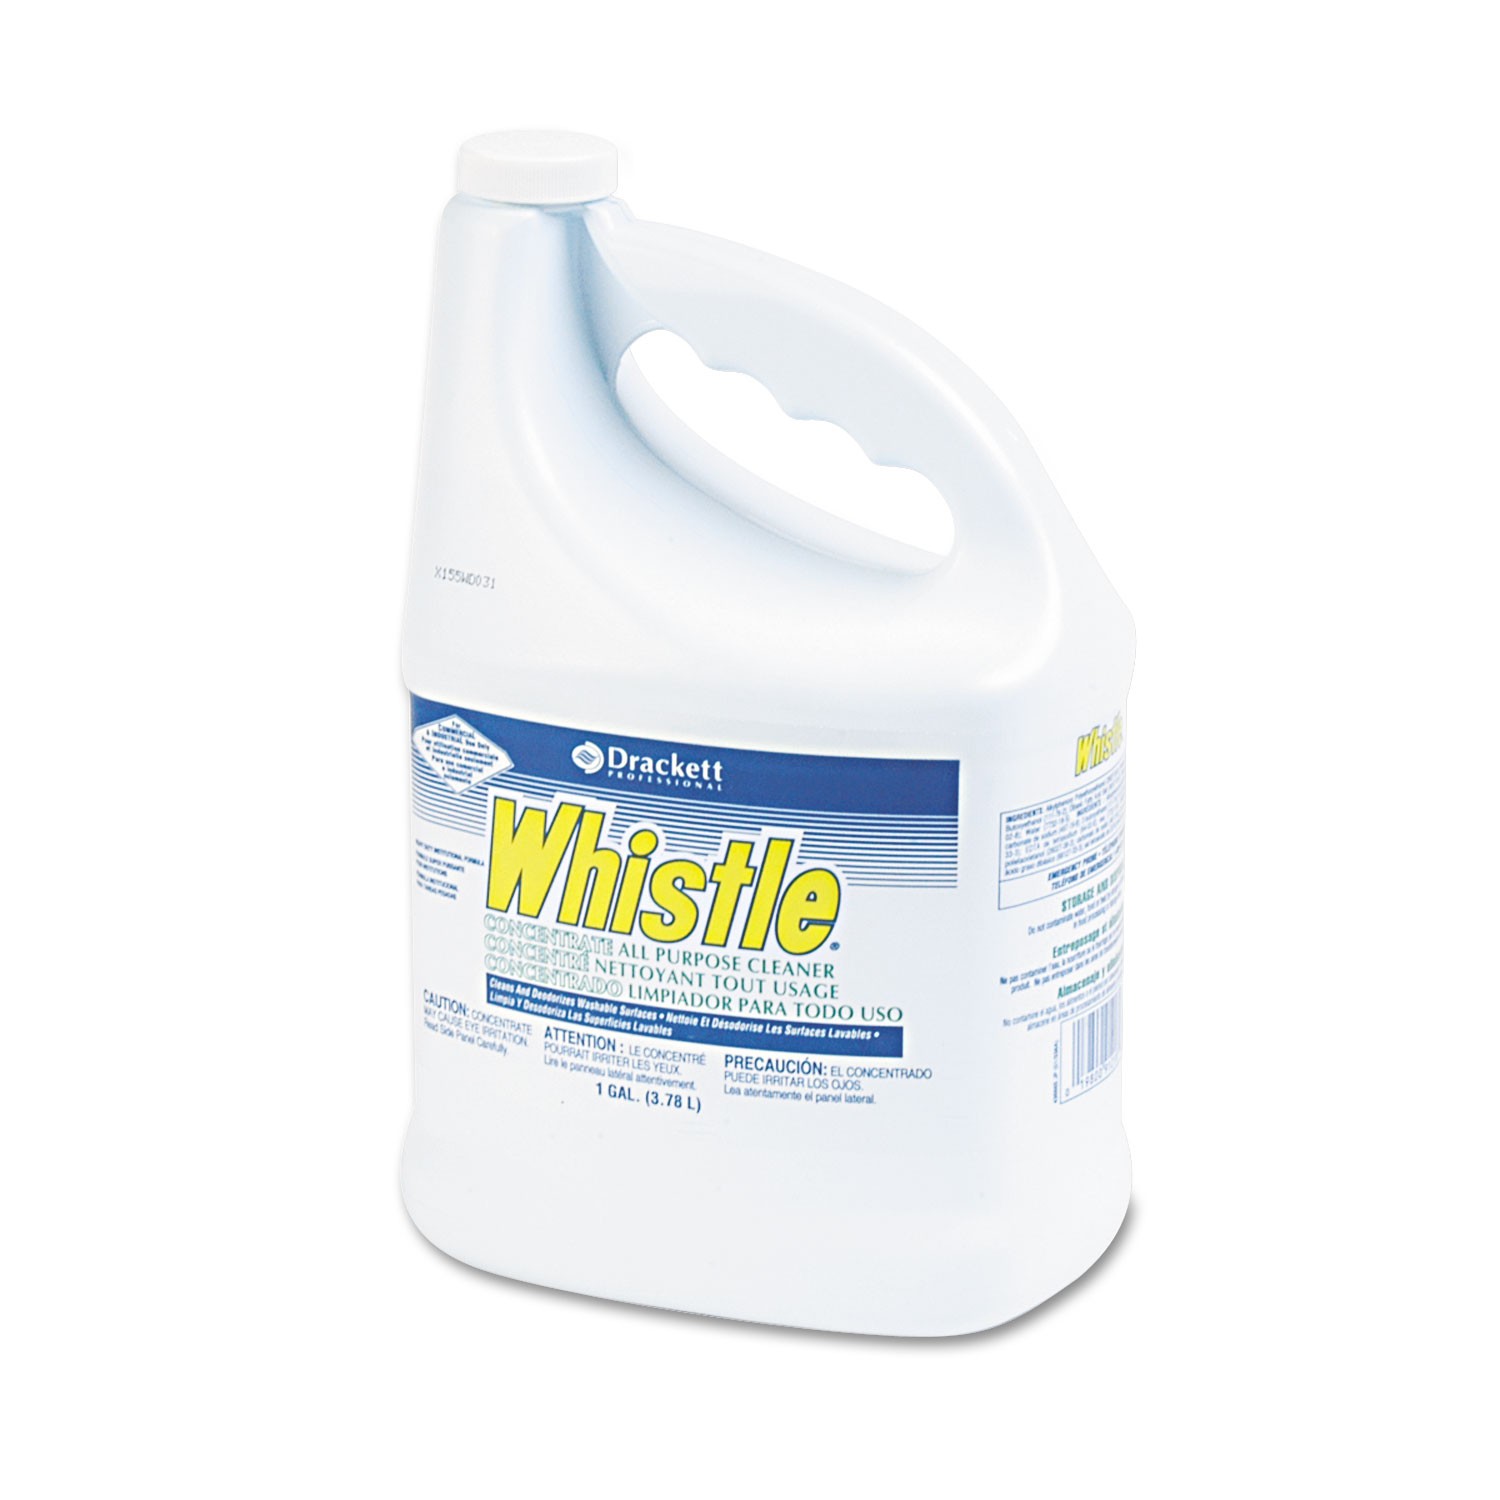 All-Purpose Cleaner, 1gal Bottle